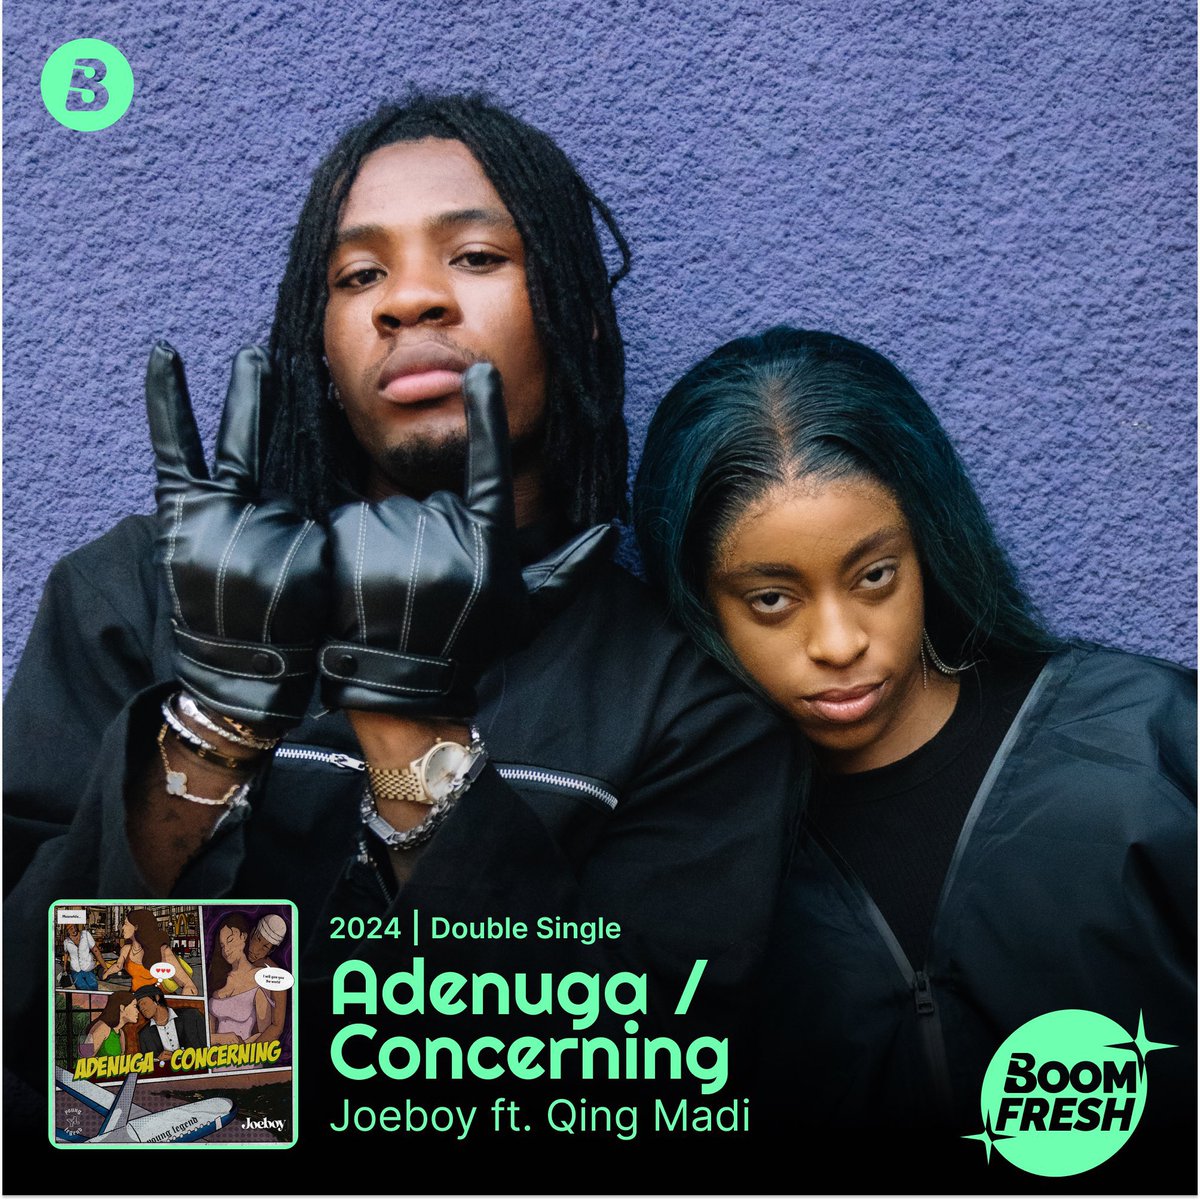 💥BOOMFRESH💥 Another @younglegend4l special! 🤩 @joeboyofficial’s #Adenuga ft @qingmadi & #Concerning OUT NOW! 🔥🌹 Go listen on Boomplay! ➡️: Boom.lnk.to/JoeboyAdenugaC… #BoomFresh #HomeOfMusic